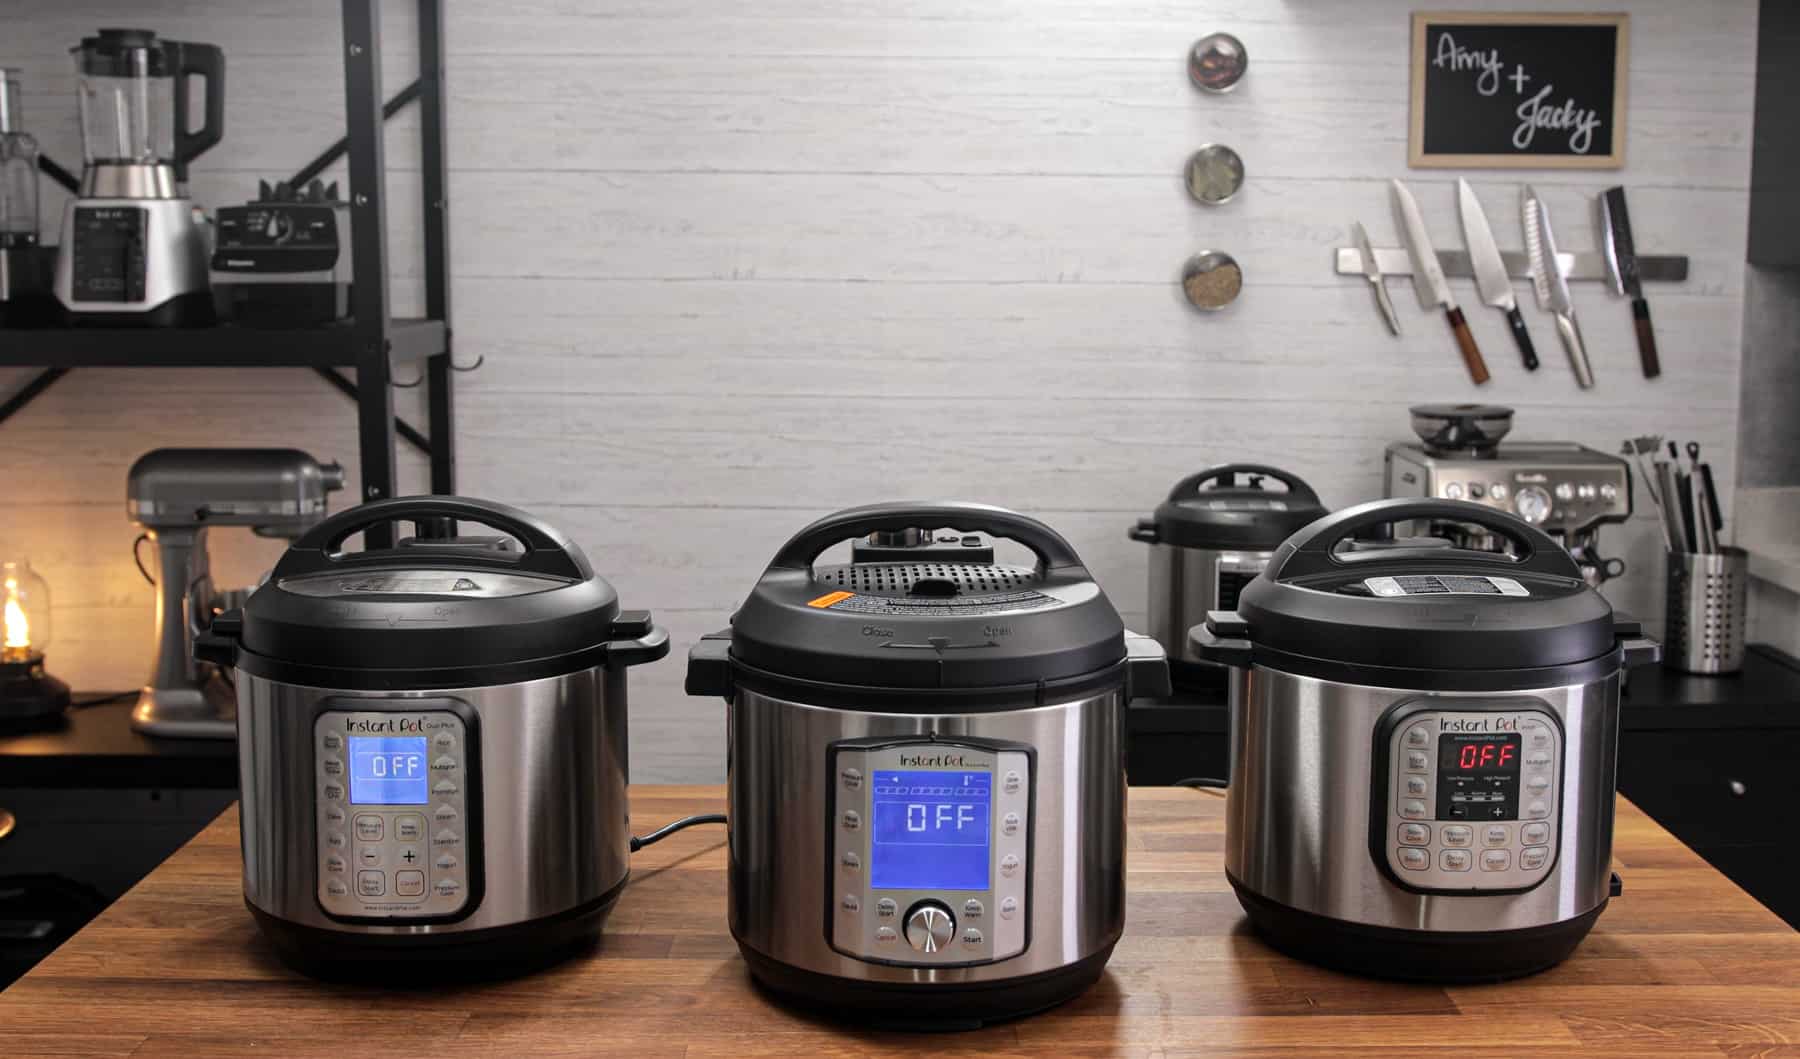 Instant Pot Review: Duo Evo Plus, Duo Nova, and Duo SV - Reviewed